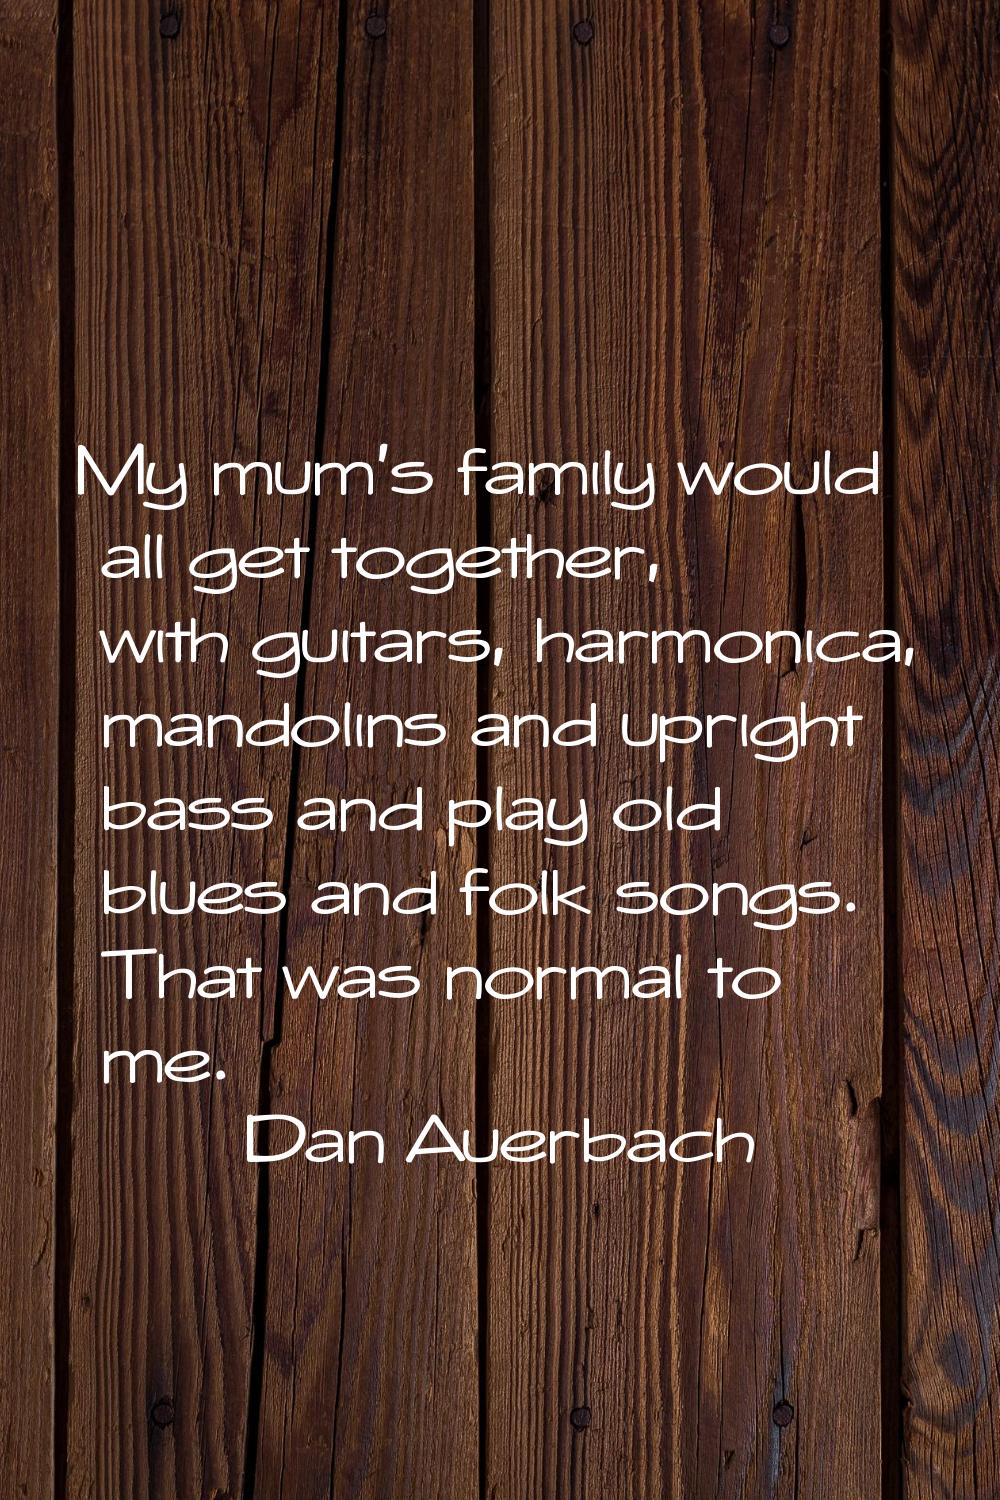 My mum's family would all get together, with guitars, harmonica, mandolins and upright bass and pla